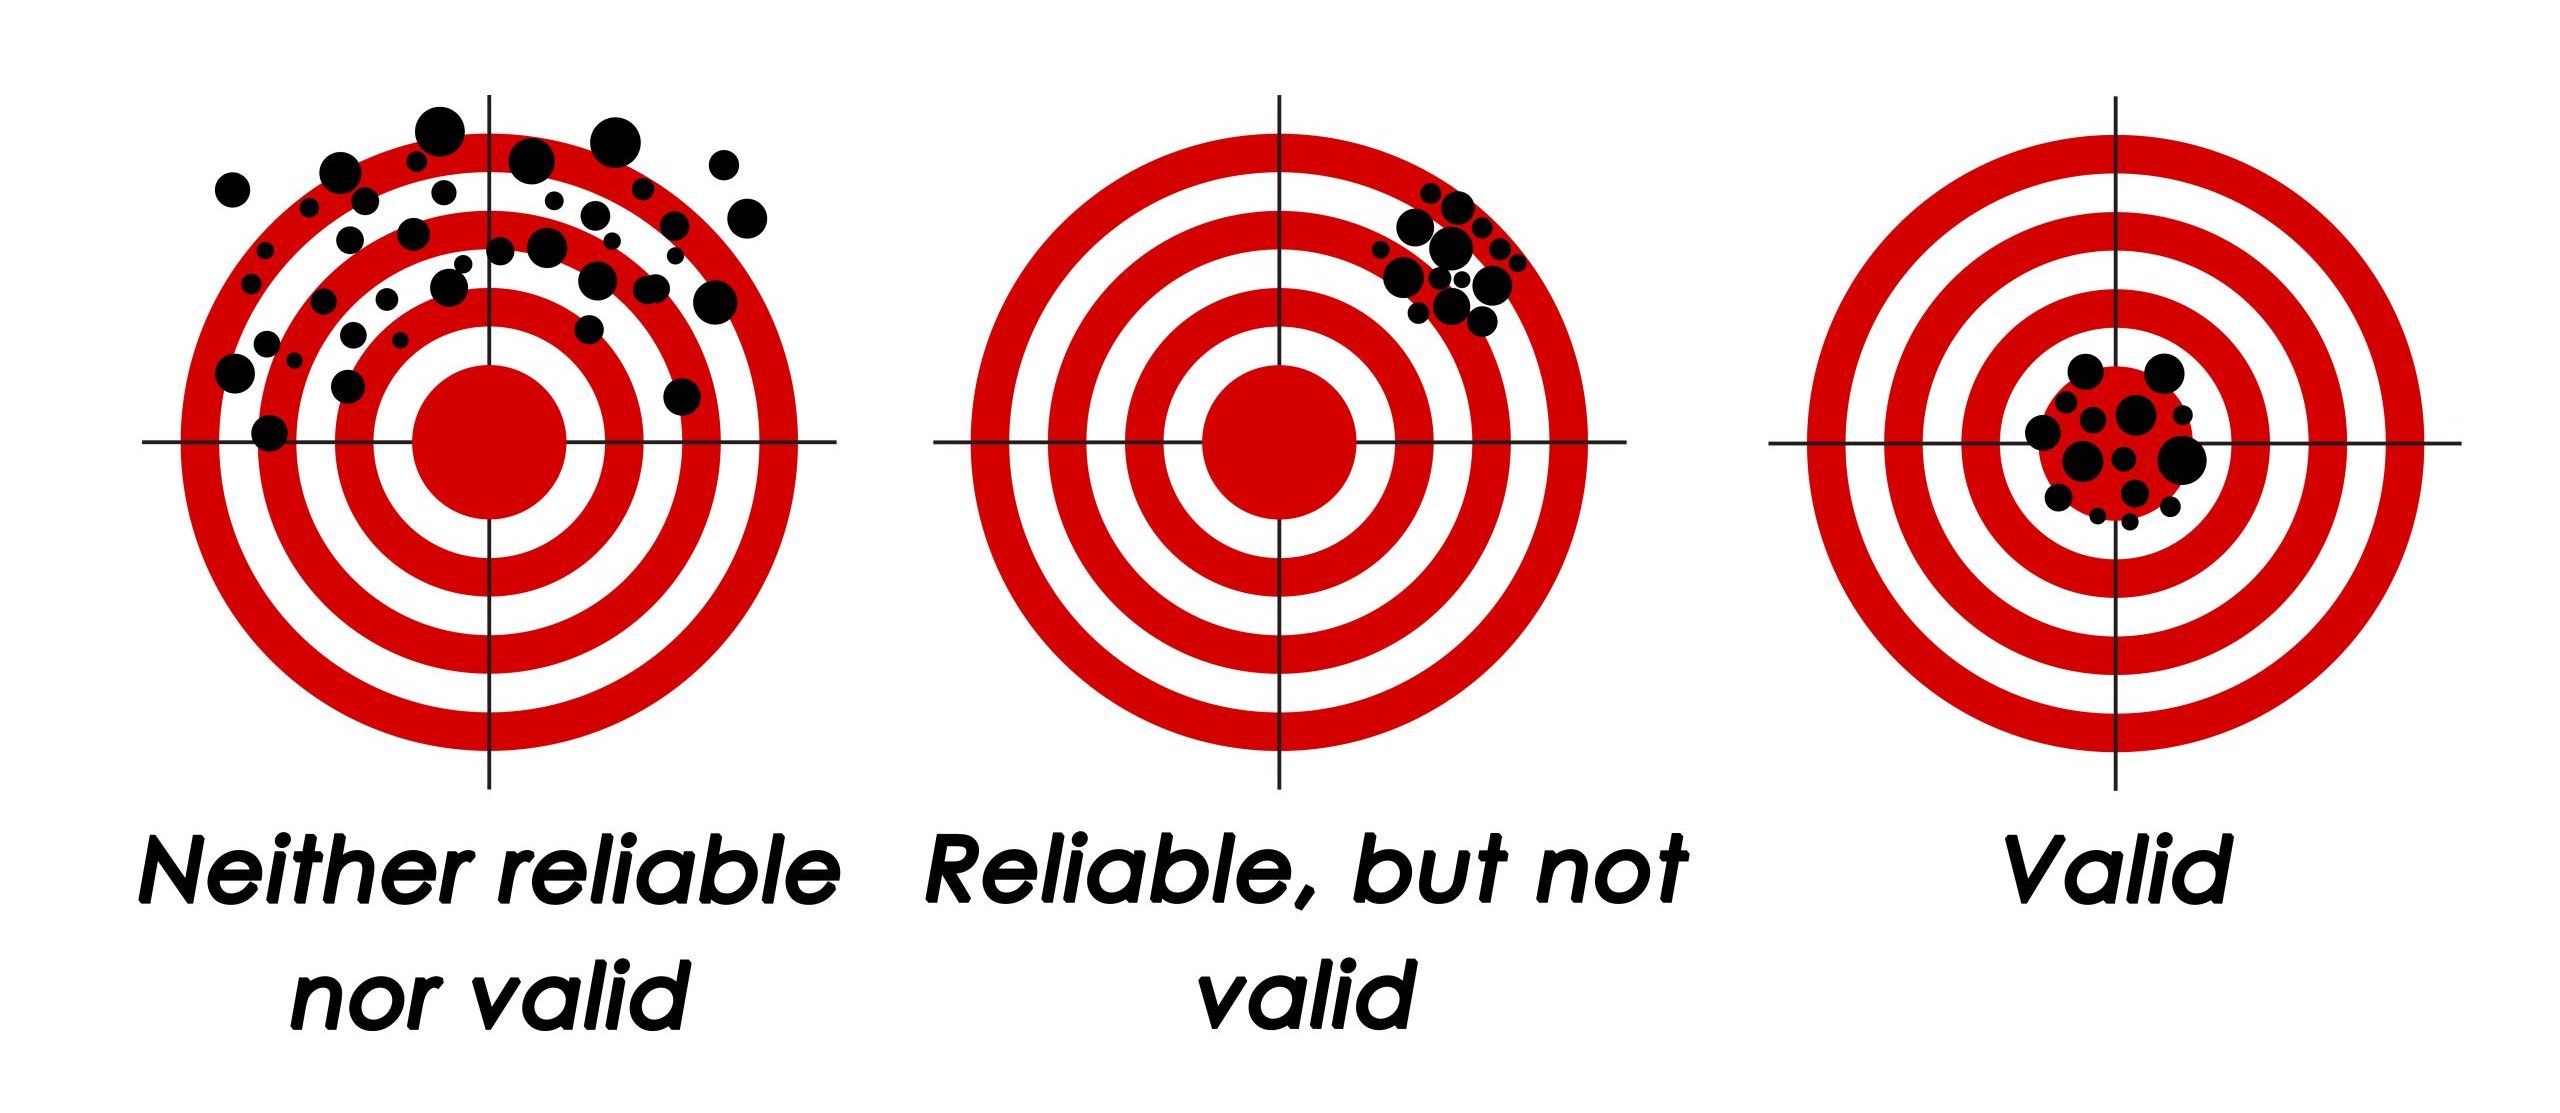 This figure uses images of three targets with bullet holes to demonstrate reliability and validity